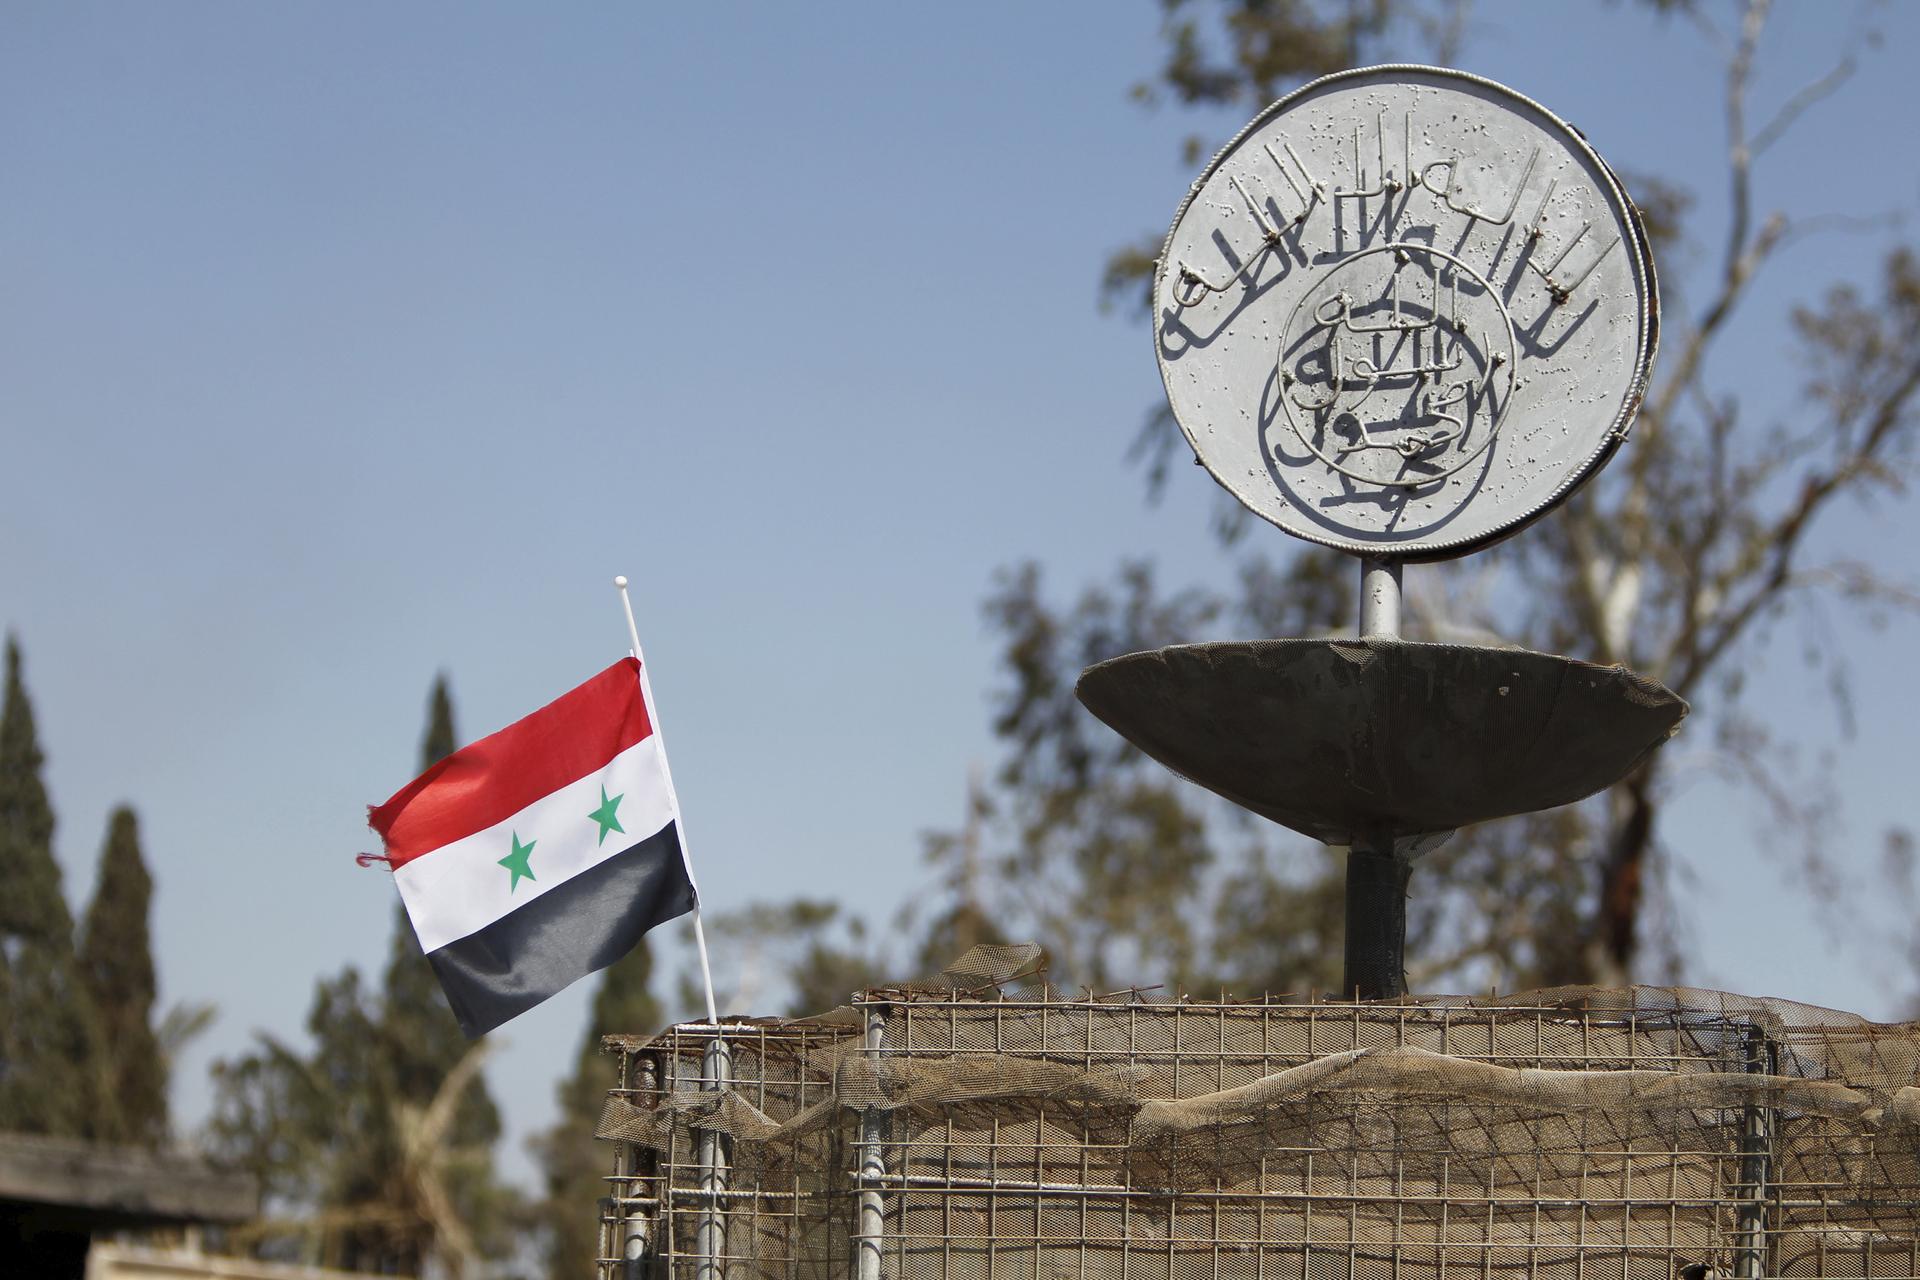 A Syrian national flag flutters next to the Islamic State's slogan at a roundabout where executions were carried out by ISIS militants in the city of Palmyra, in Homs Governorate, Syria April 1, 2016.